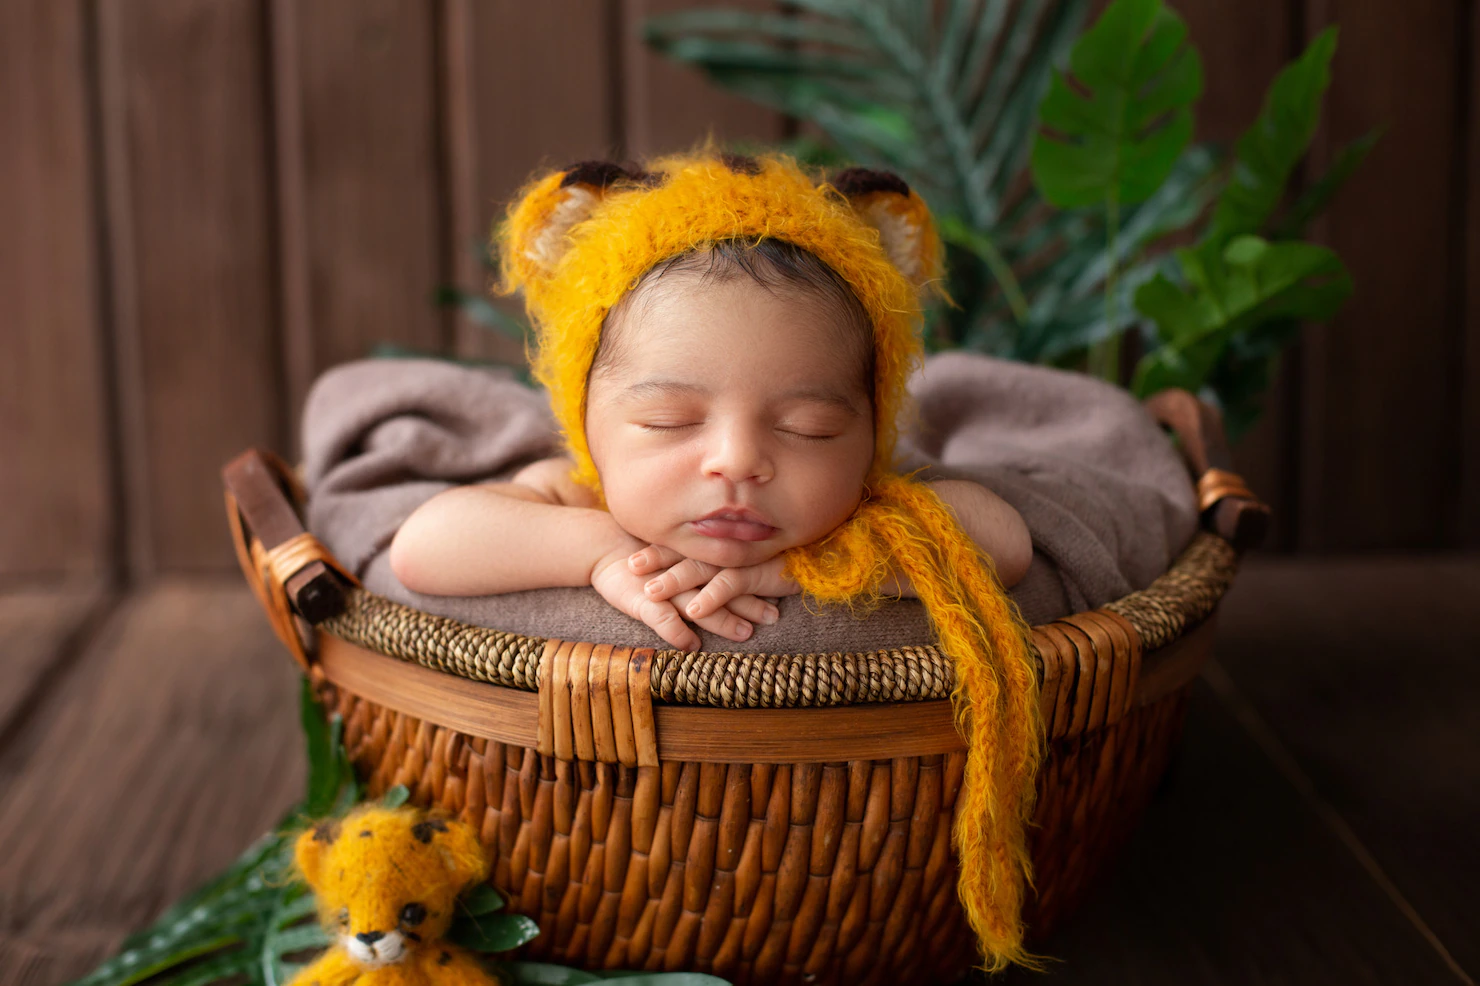 infant-sleeping-pretty-baby-boy-yellow-animal-shaped-hat-inside-brown-basket-along-with-green-leafs-wooden-room_179666-122